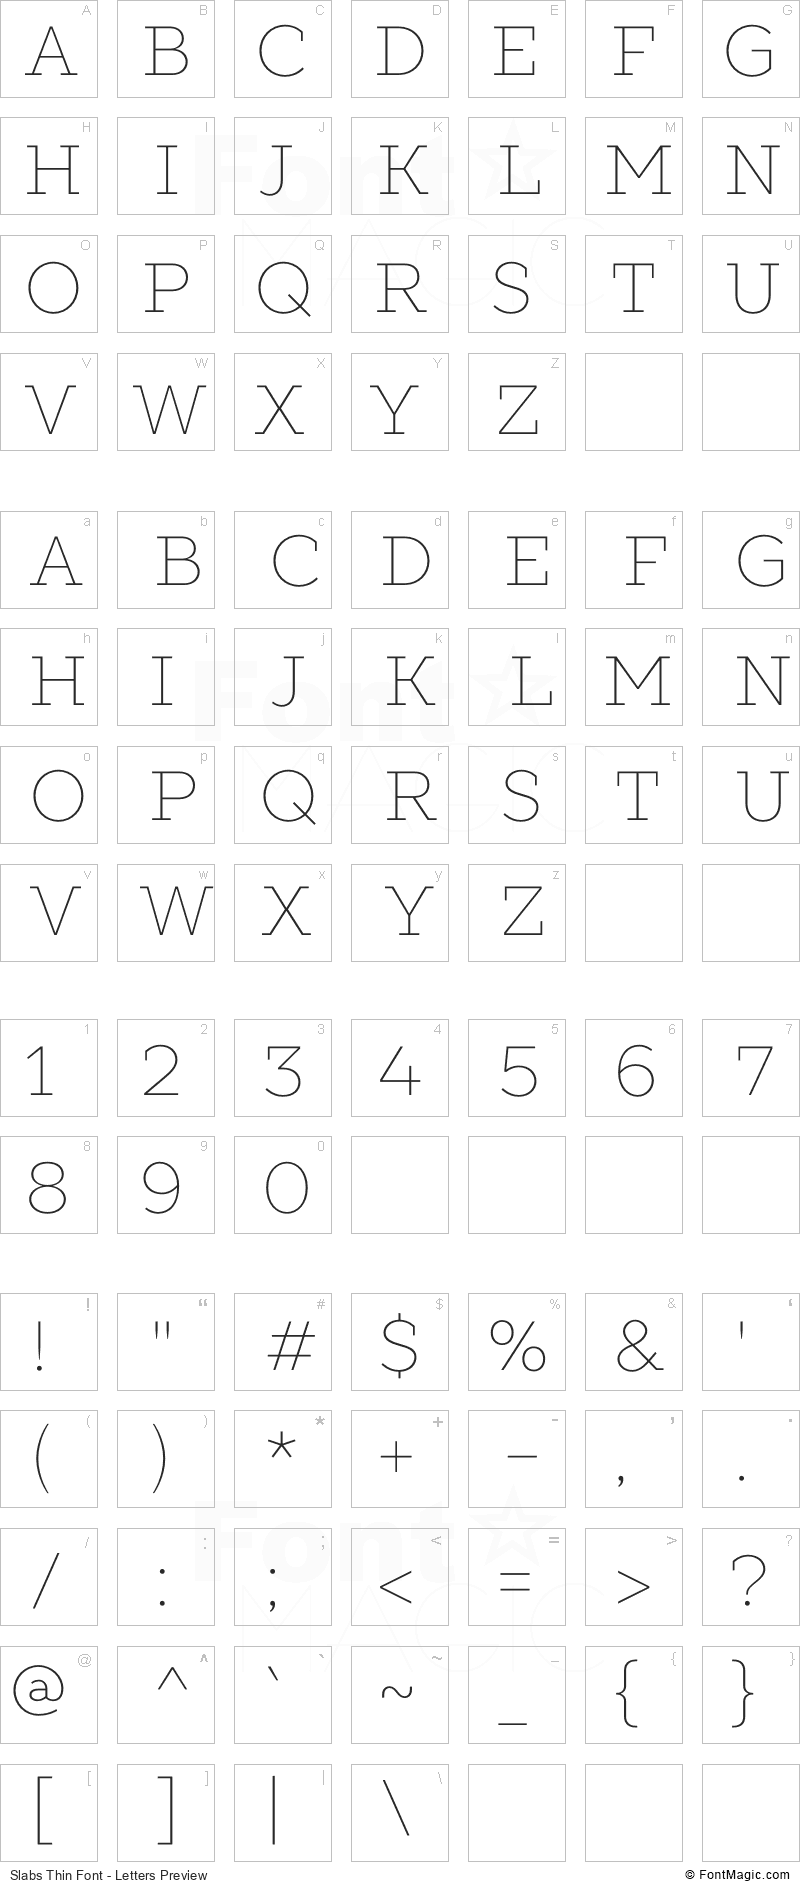 Slabs Thin Font - All Latters Preview Chart